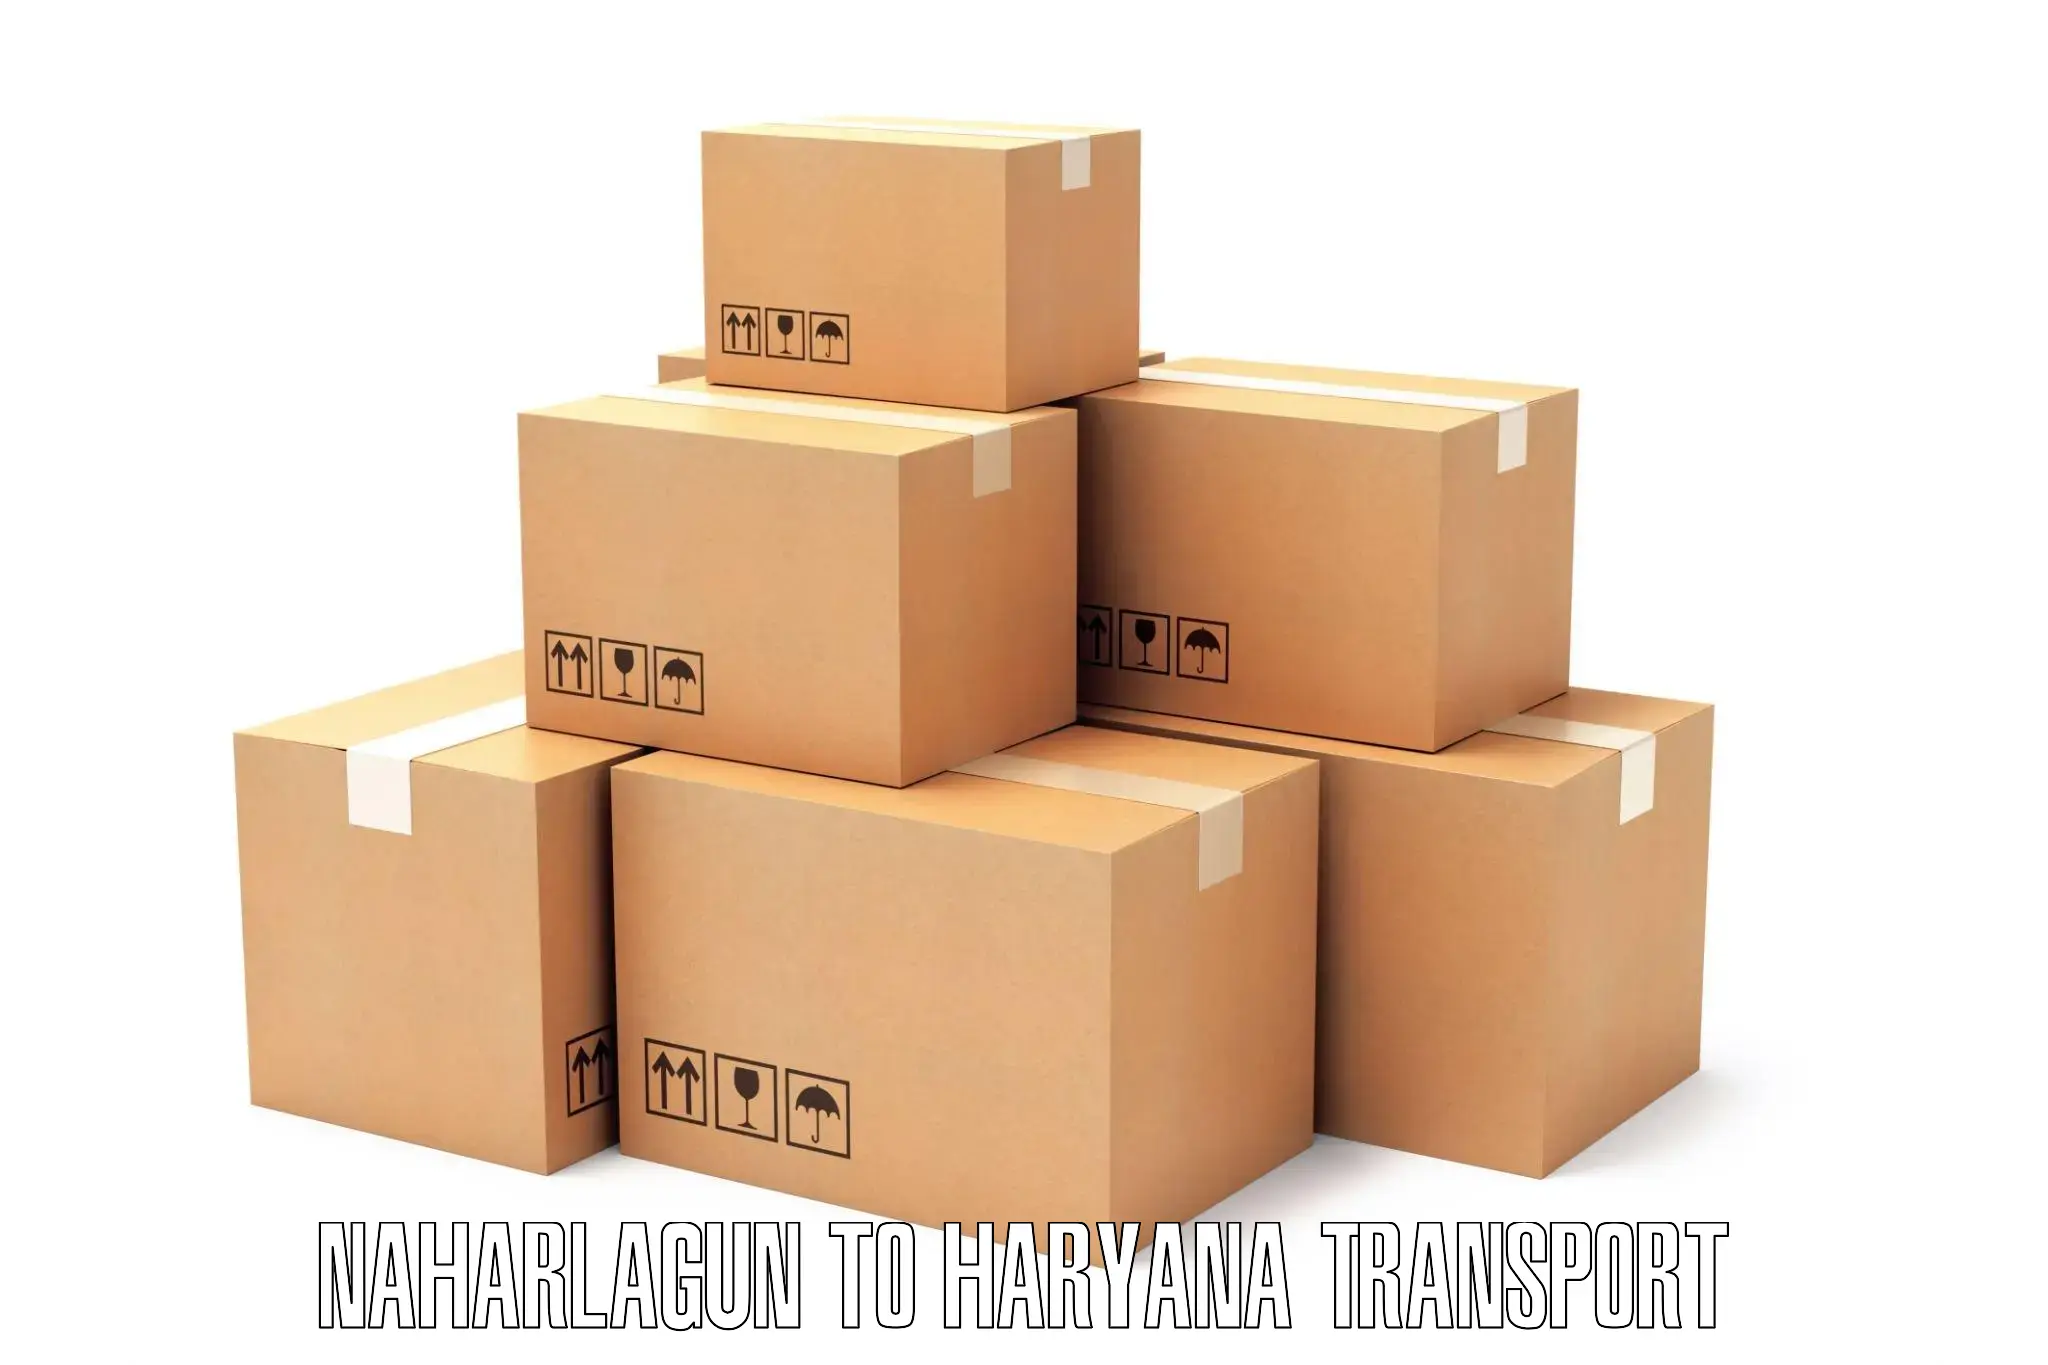 Parcel transport services in Naharlagun to Hodal